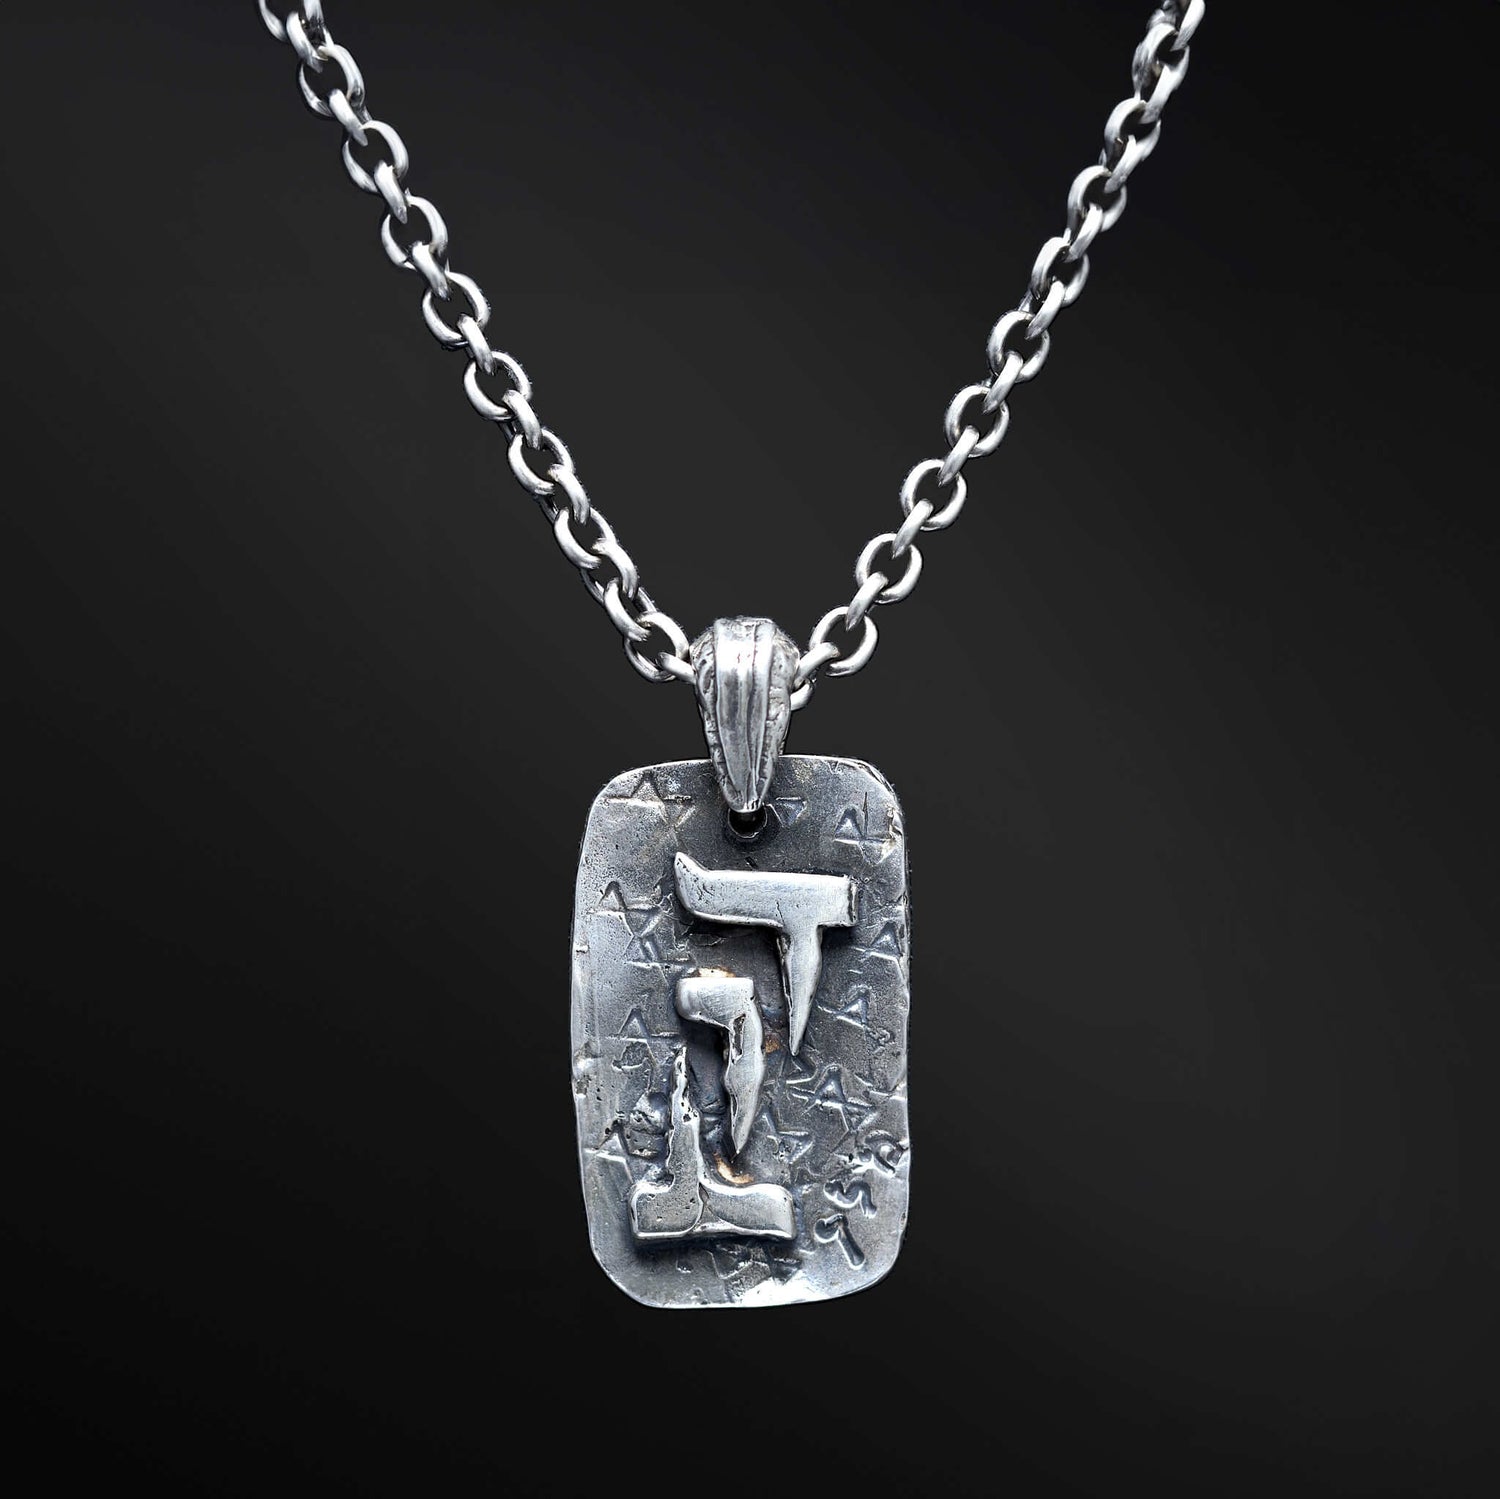 &quot;David Necklace: A captivating image of our exquisite necklace celebrating the essence of King David. The pendant proudly displays the Hebrew letters for &quot;David&quot; and the iconic Magen David symbol, representing a profound connection to heritage and strength. The photo showcases the intricate details of the necklace, serving as a powerful inspiration of faith and courage.&quot;